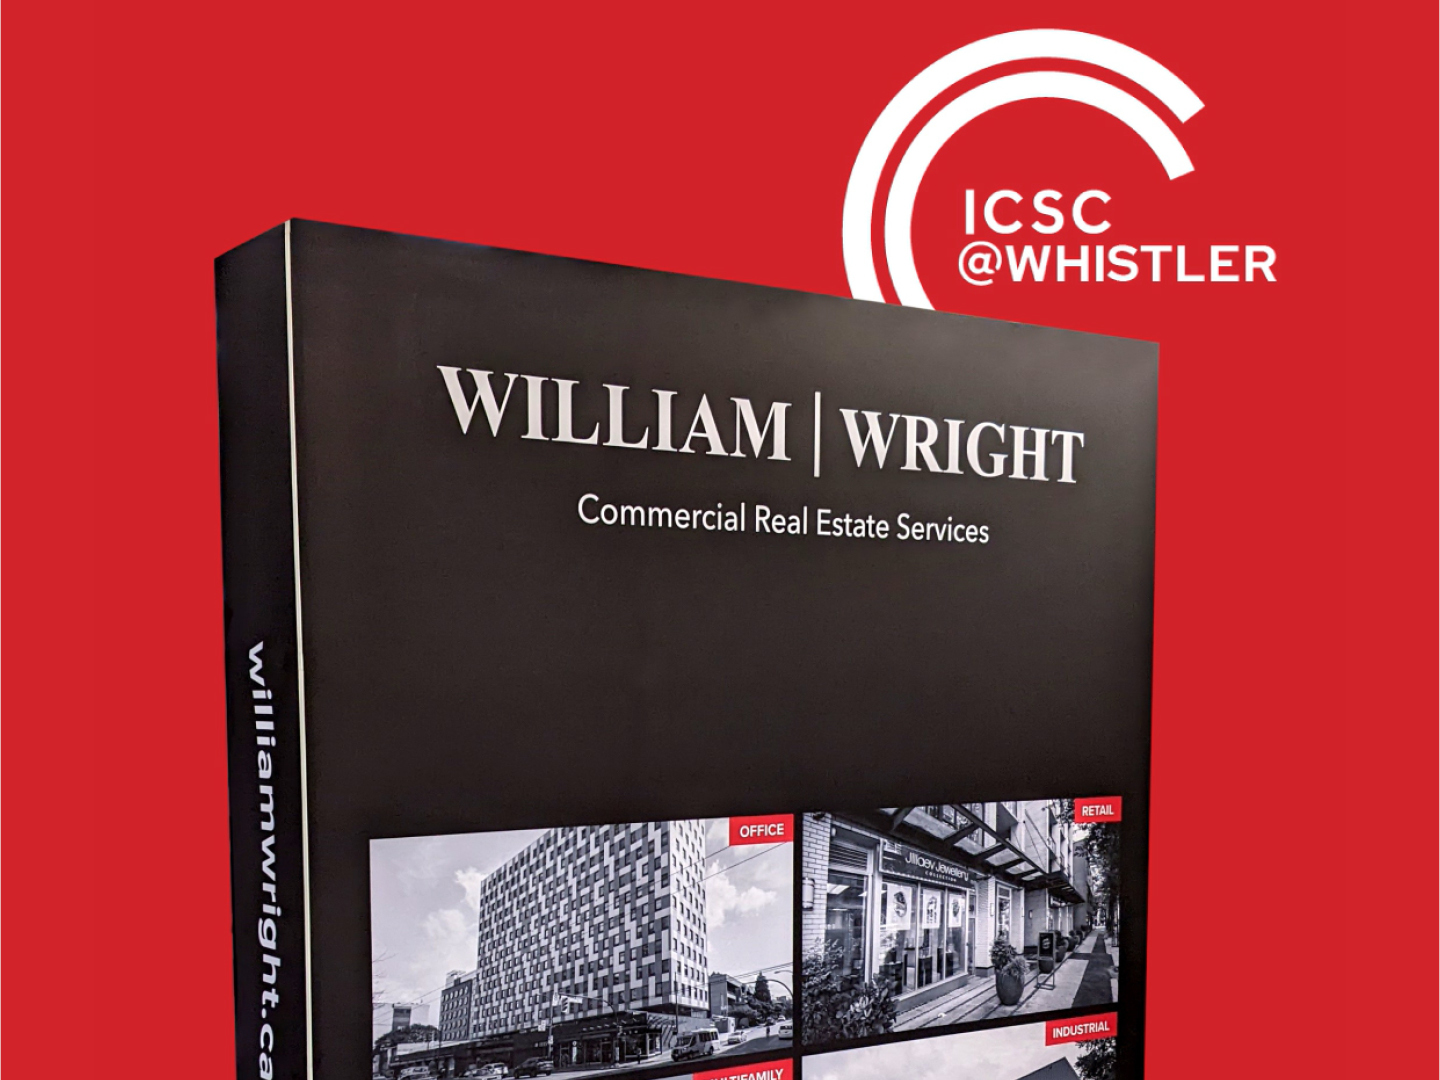 William Wright Commercial at ICSC@Whistler